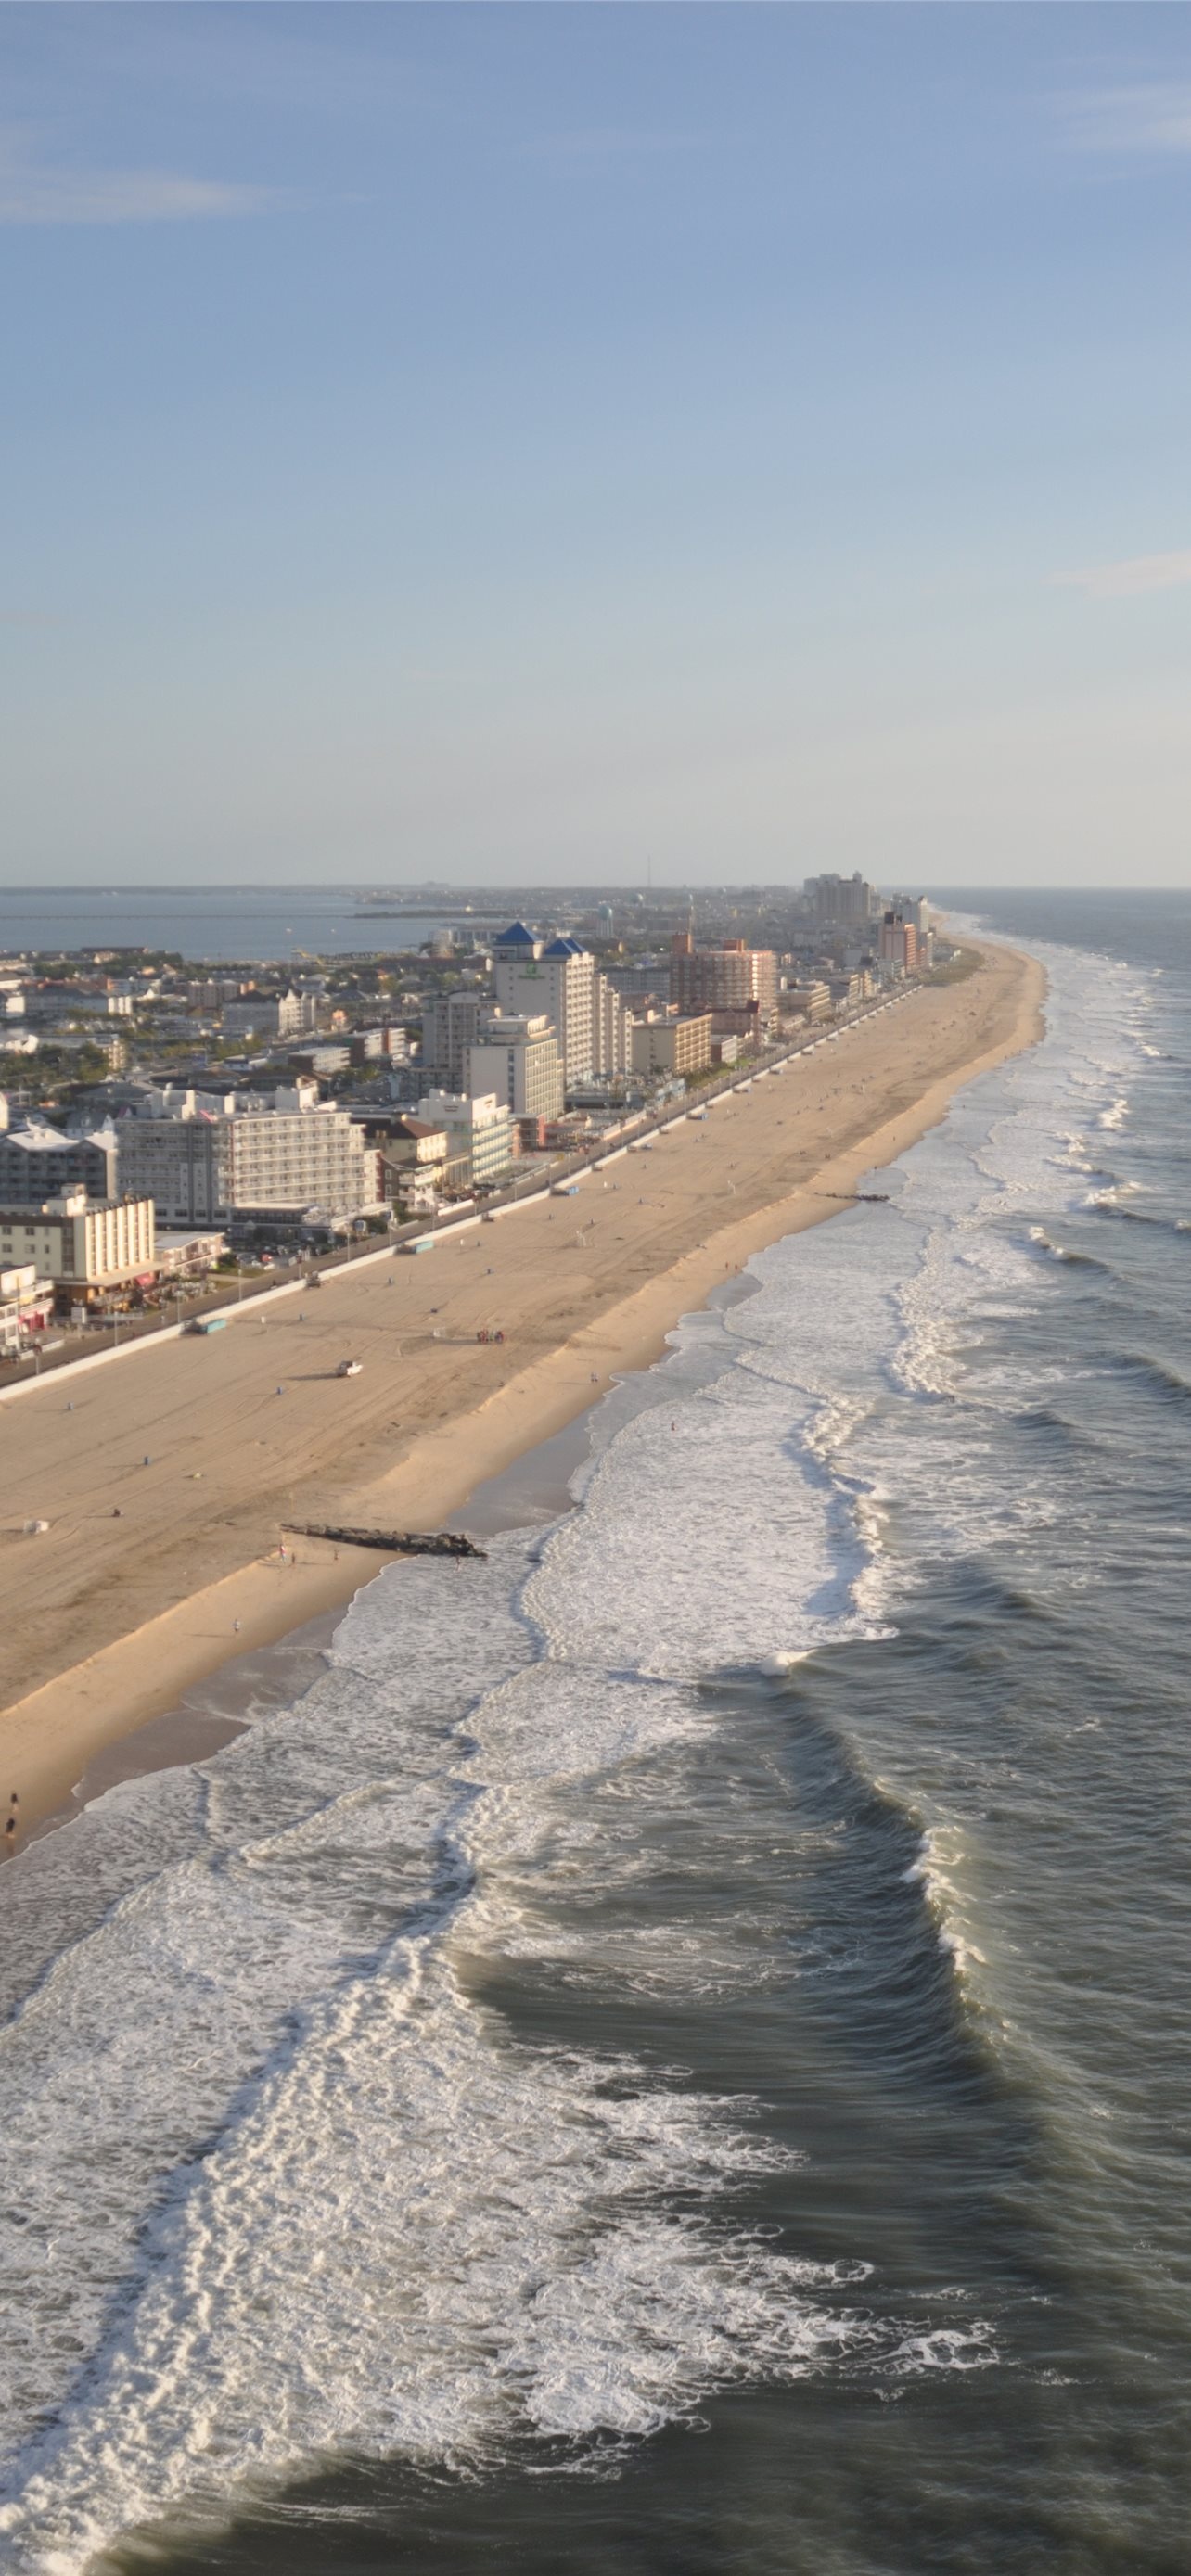 Virginia Beach, Latest iPhone wallpapers, Free HD, Wallpapers for iPhone, 1290x2780 HD Handy